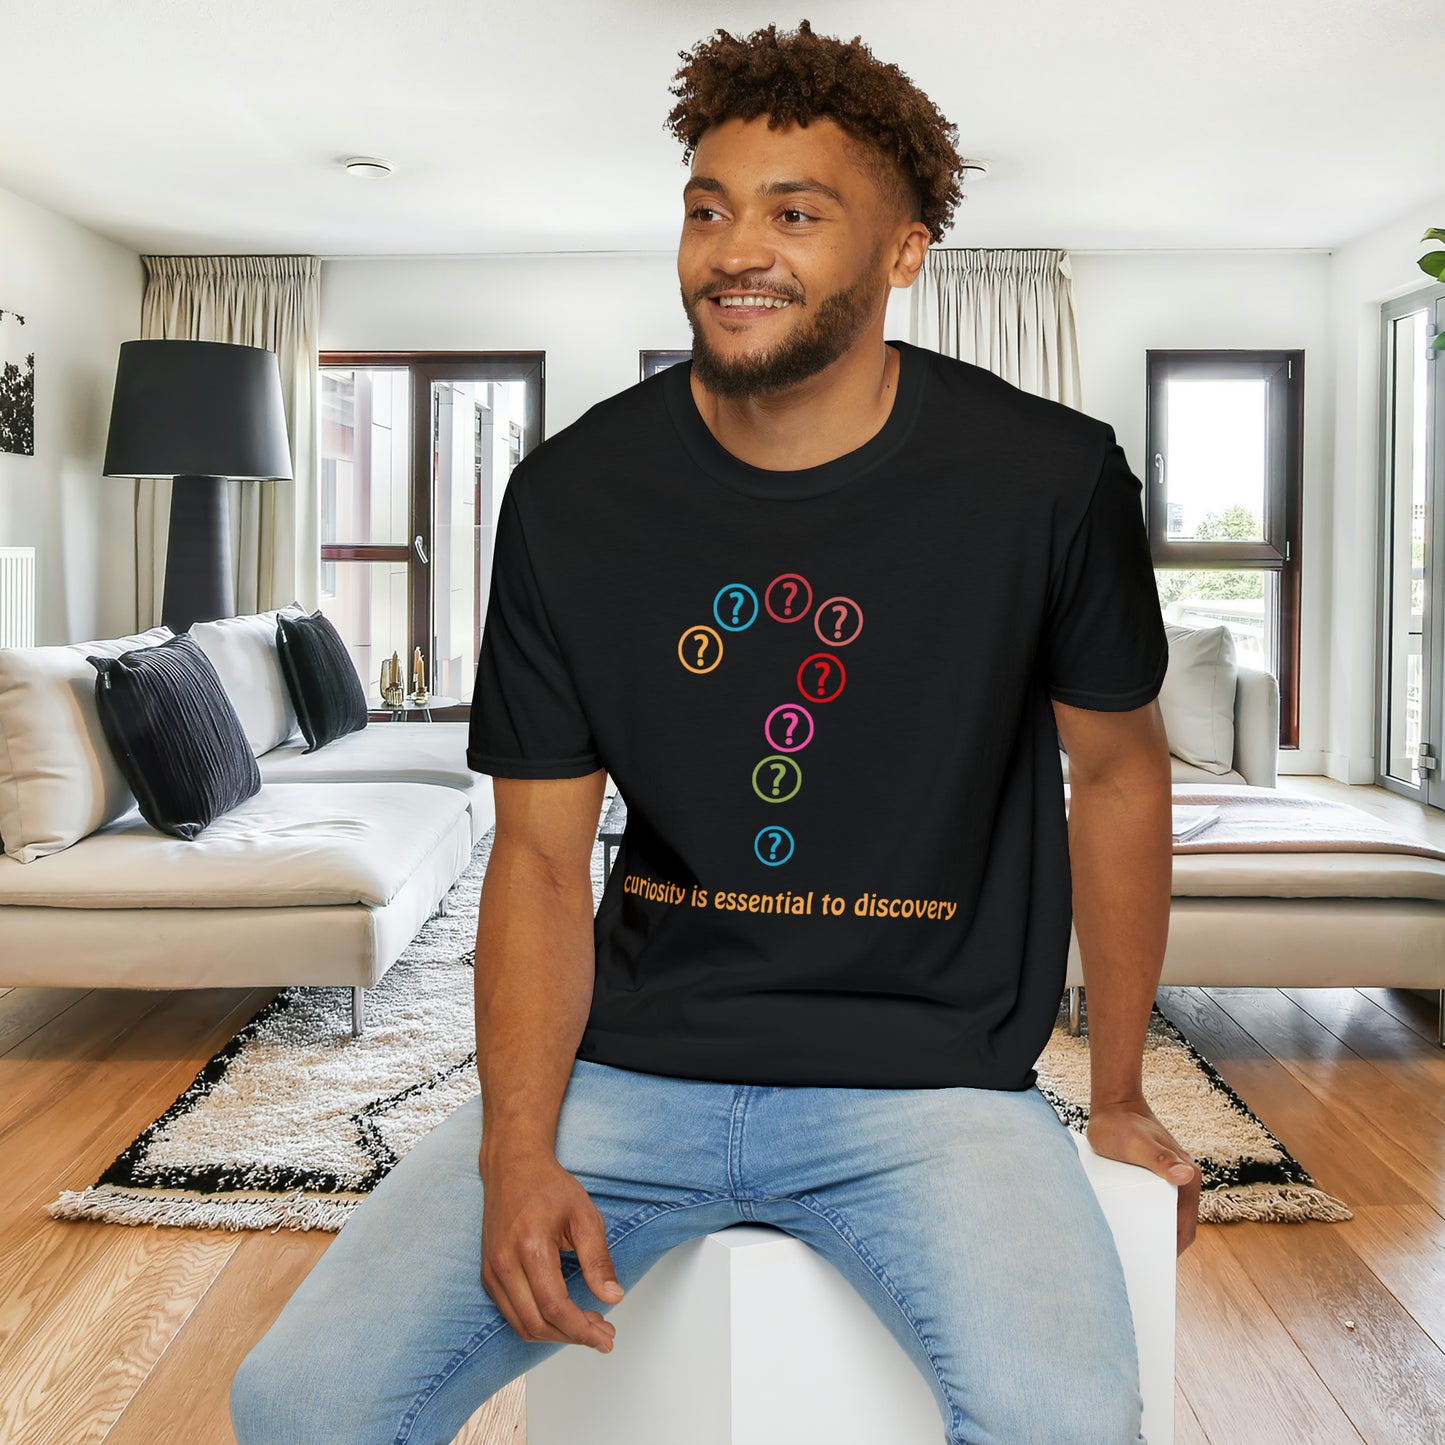 A question mark made of question marks above “curiosity is essential to discovery” message design on this Unisex Softstyle T-Shirt design.